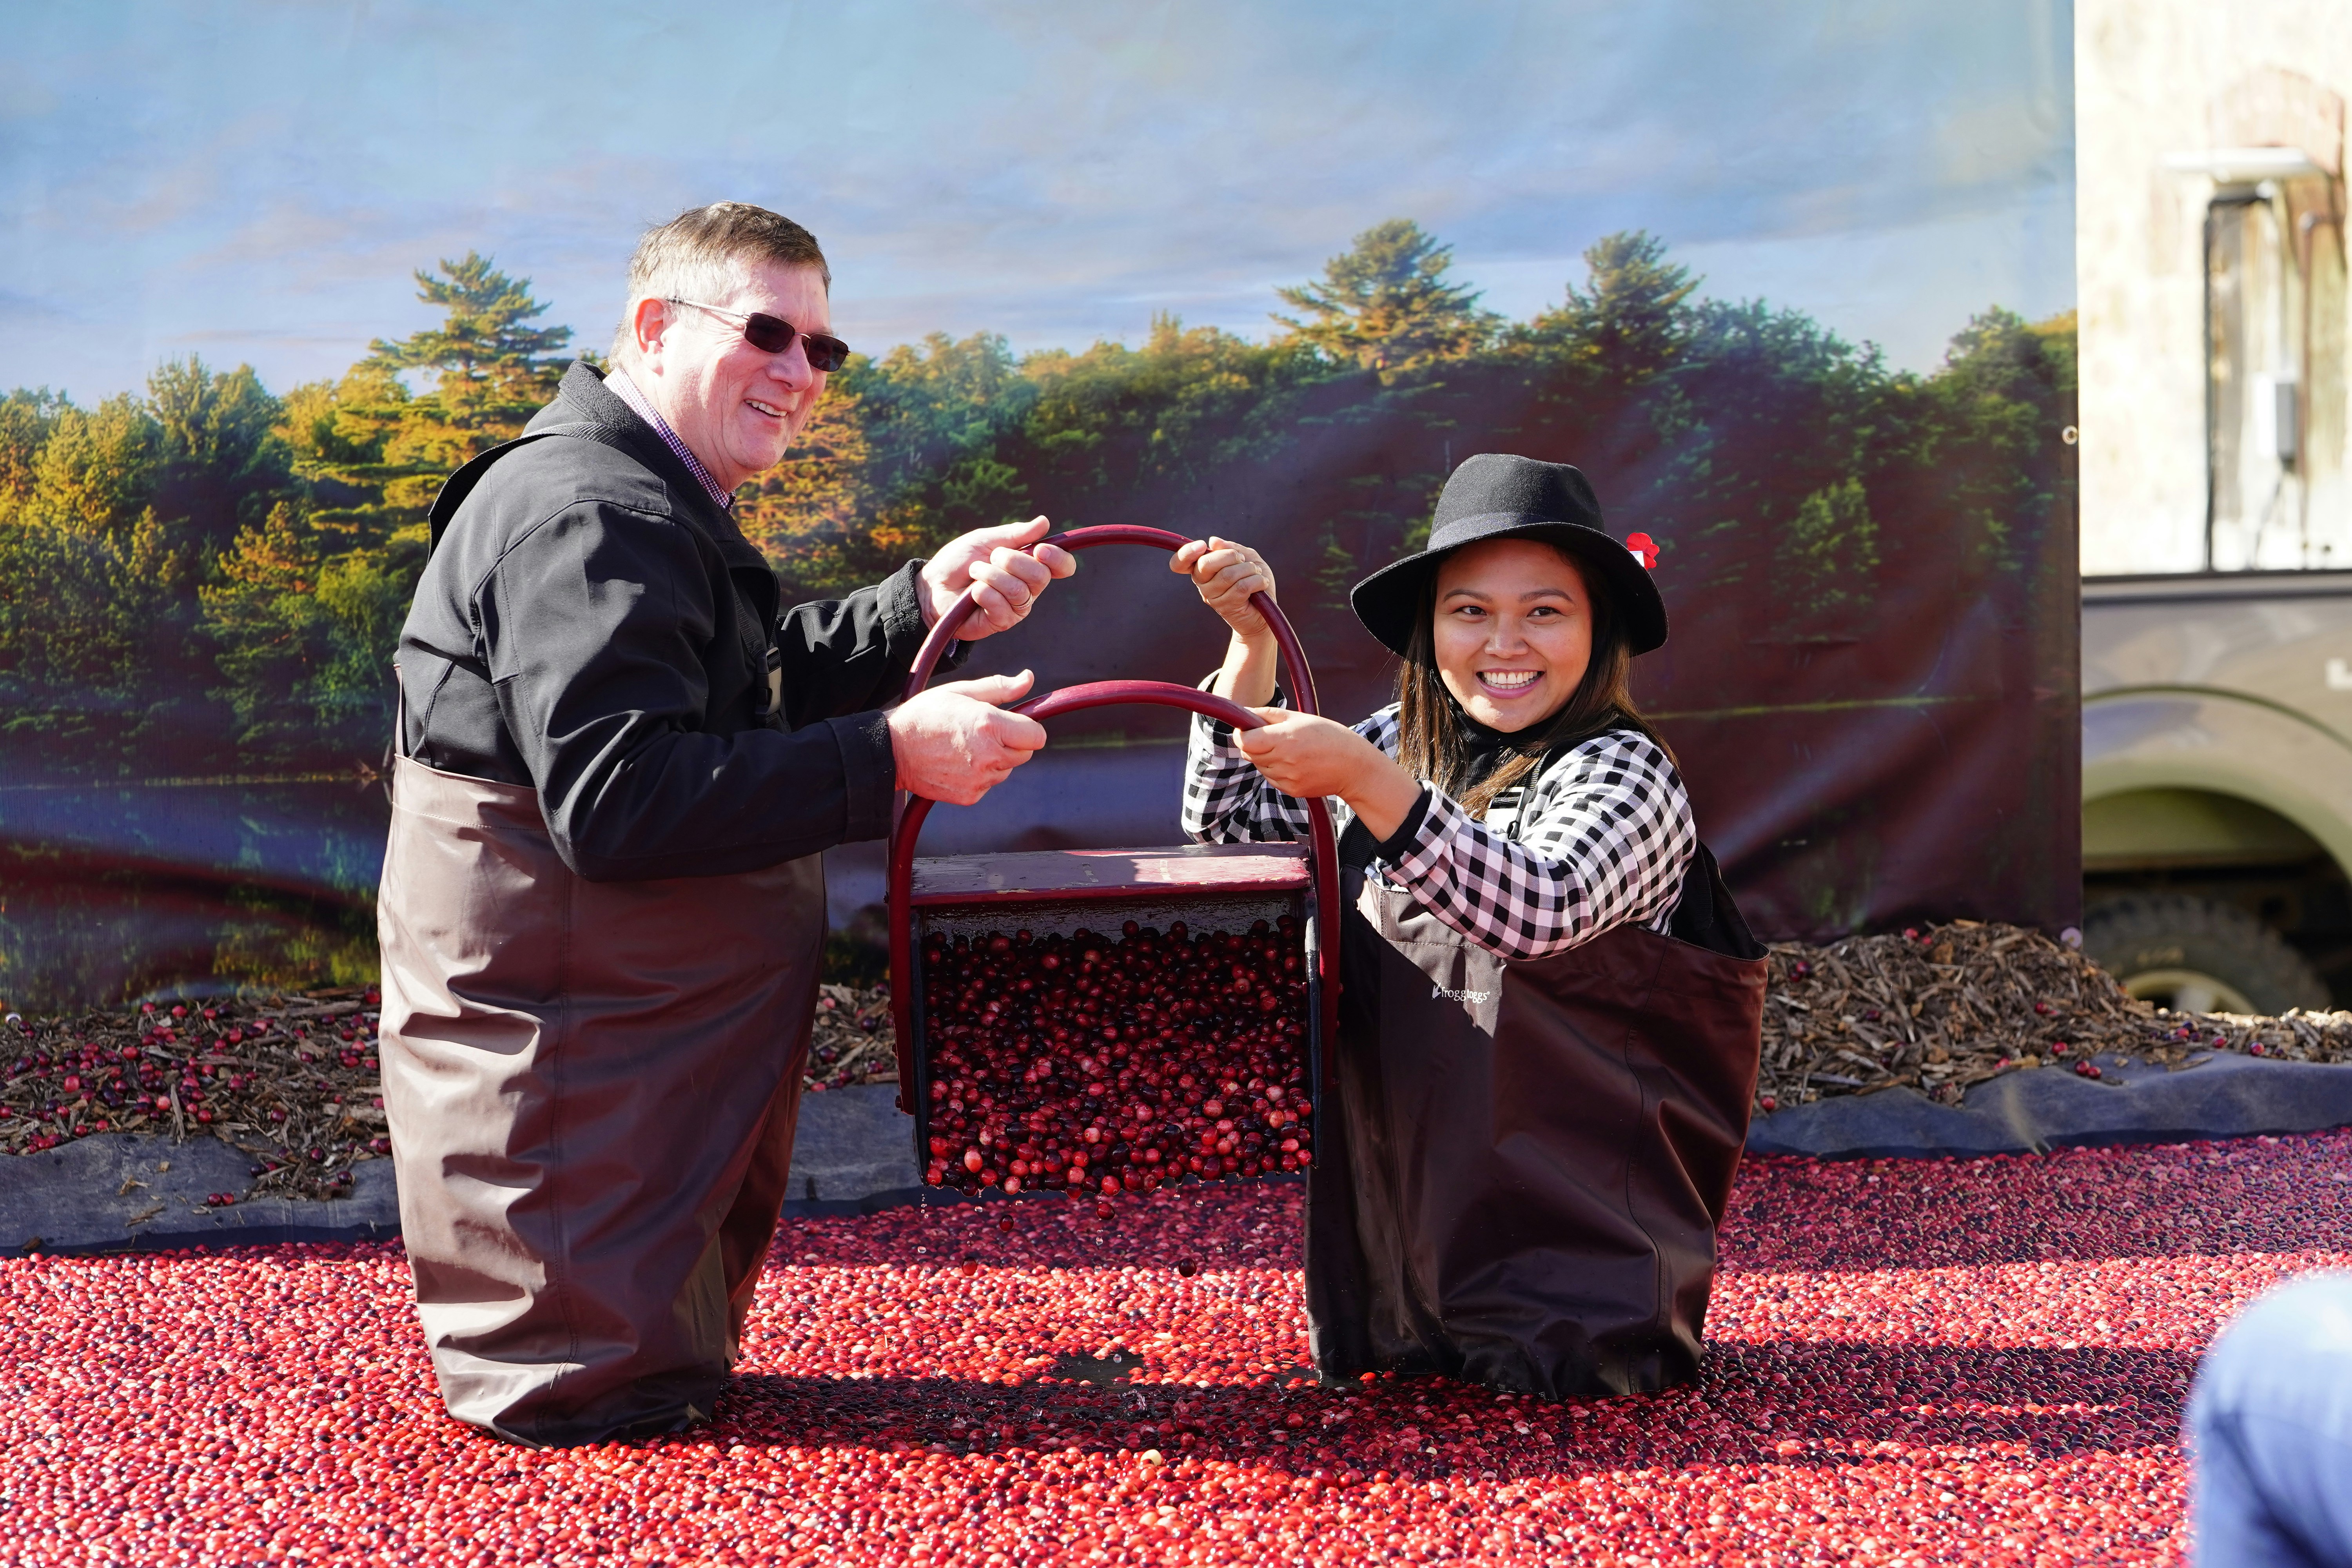 Couples at Warrens Cranberry festival enjoying their time getting photos taken while playing in a pool of cranberries, USA